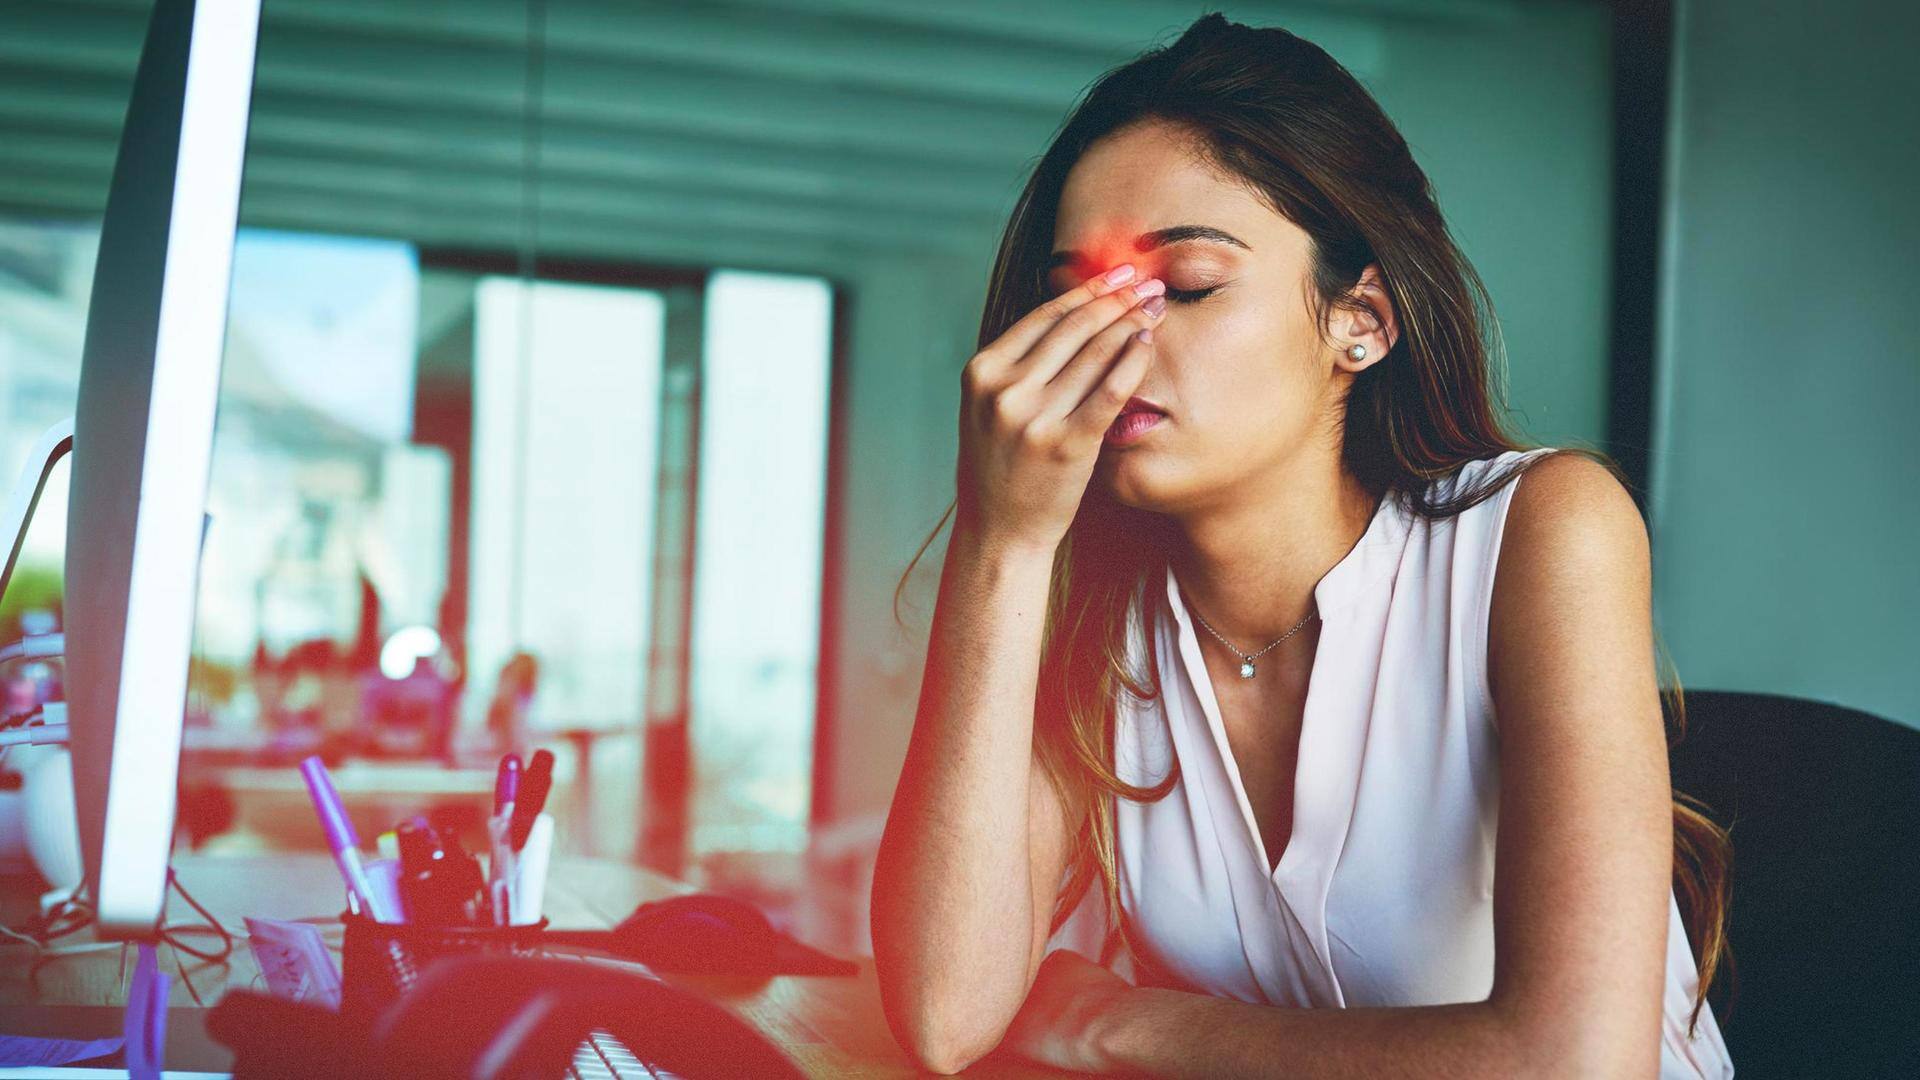 Eye strain during work? Try these exercises on your desk